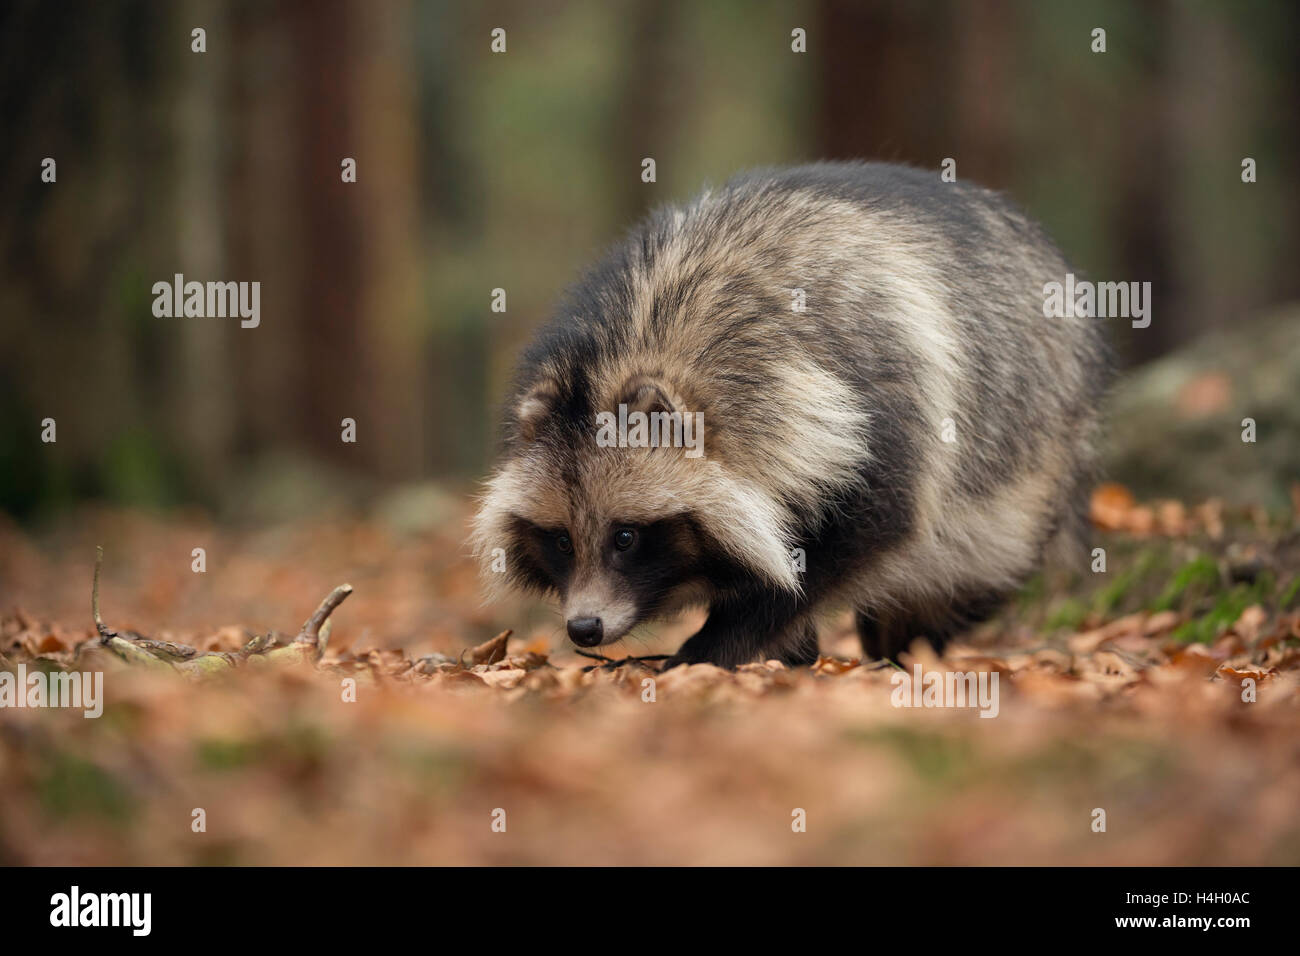 Raccoon dog / Marderhund ( Nyctereutes procyonoides ), walking through dry leaves, its nose on the ground, invasive species. Stock Photo